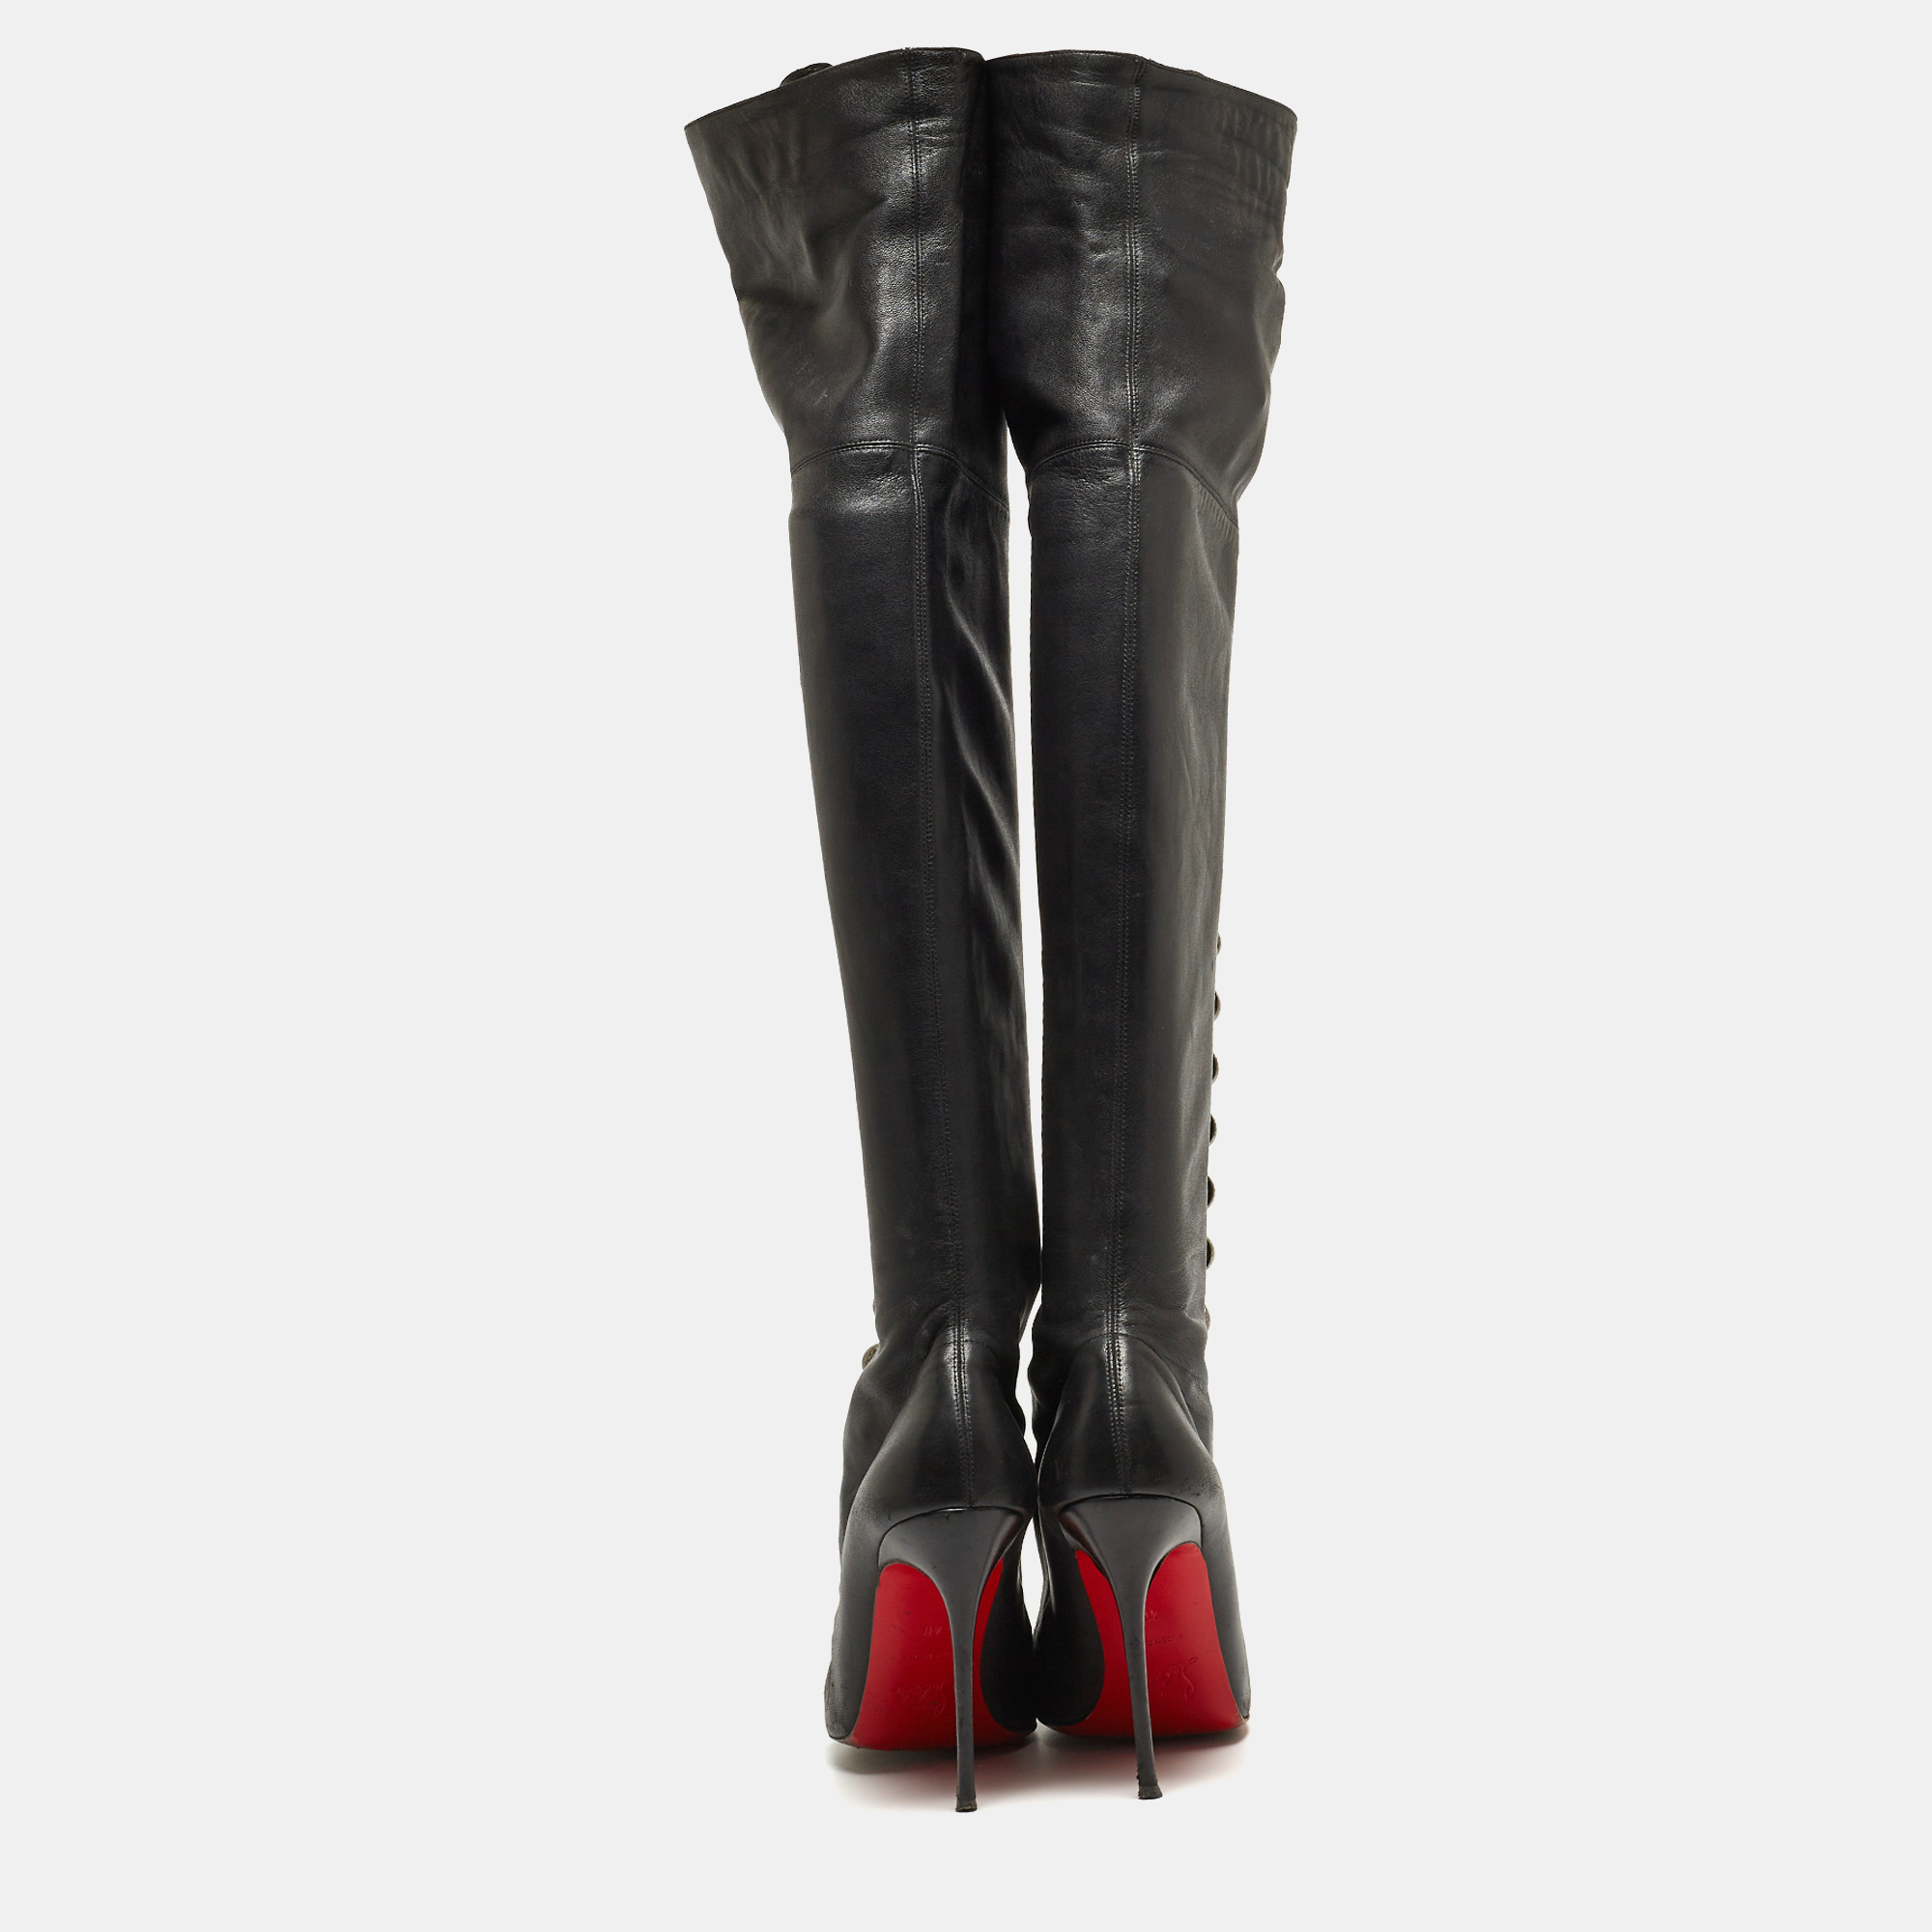 Christian Louboutin Black Leather Knee Length Boots Size 40